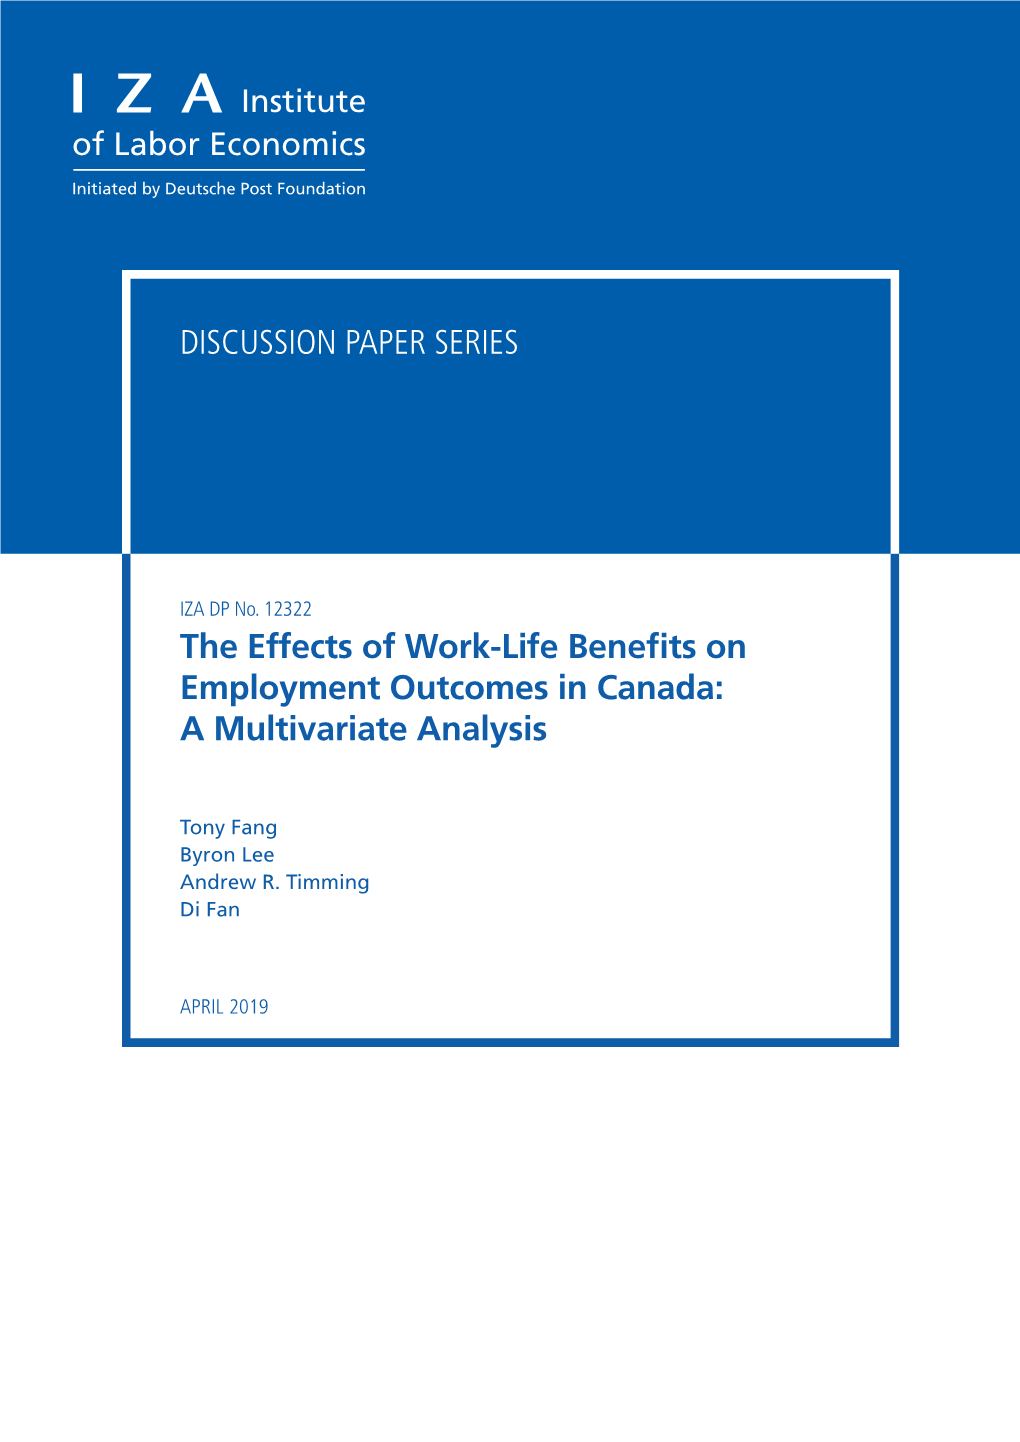 The Effects of Work-Life Benefits on Employment Outcomes in Canada: a Multivariate Analysis